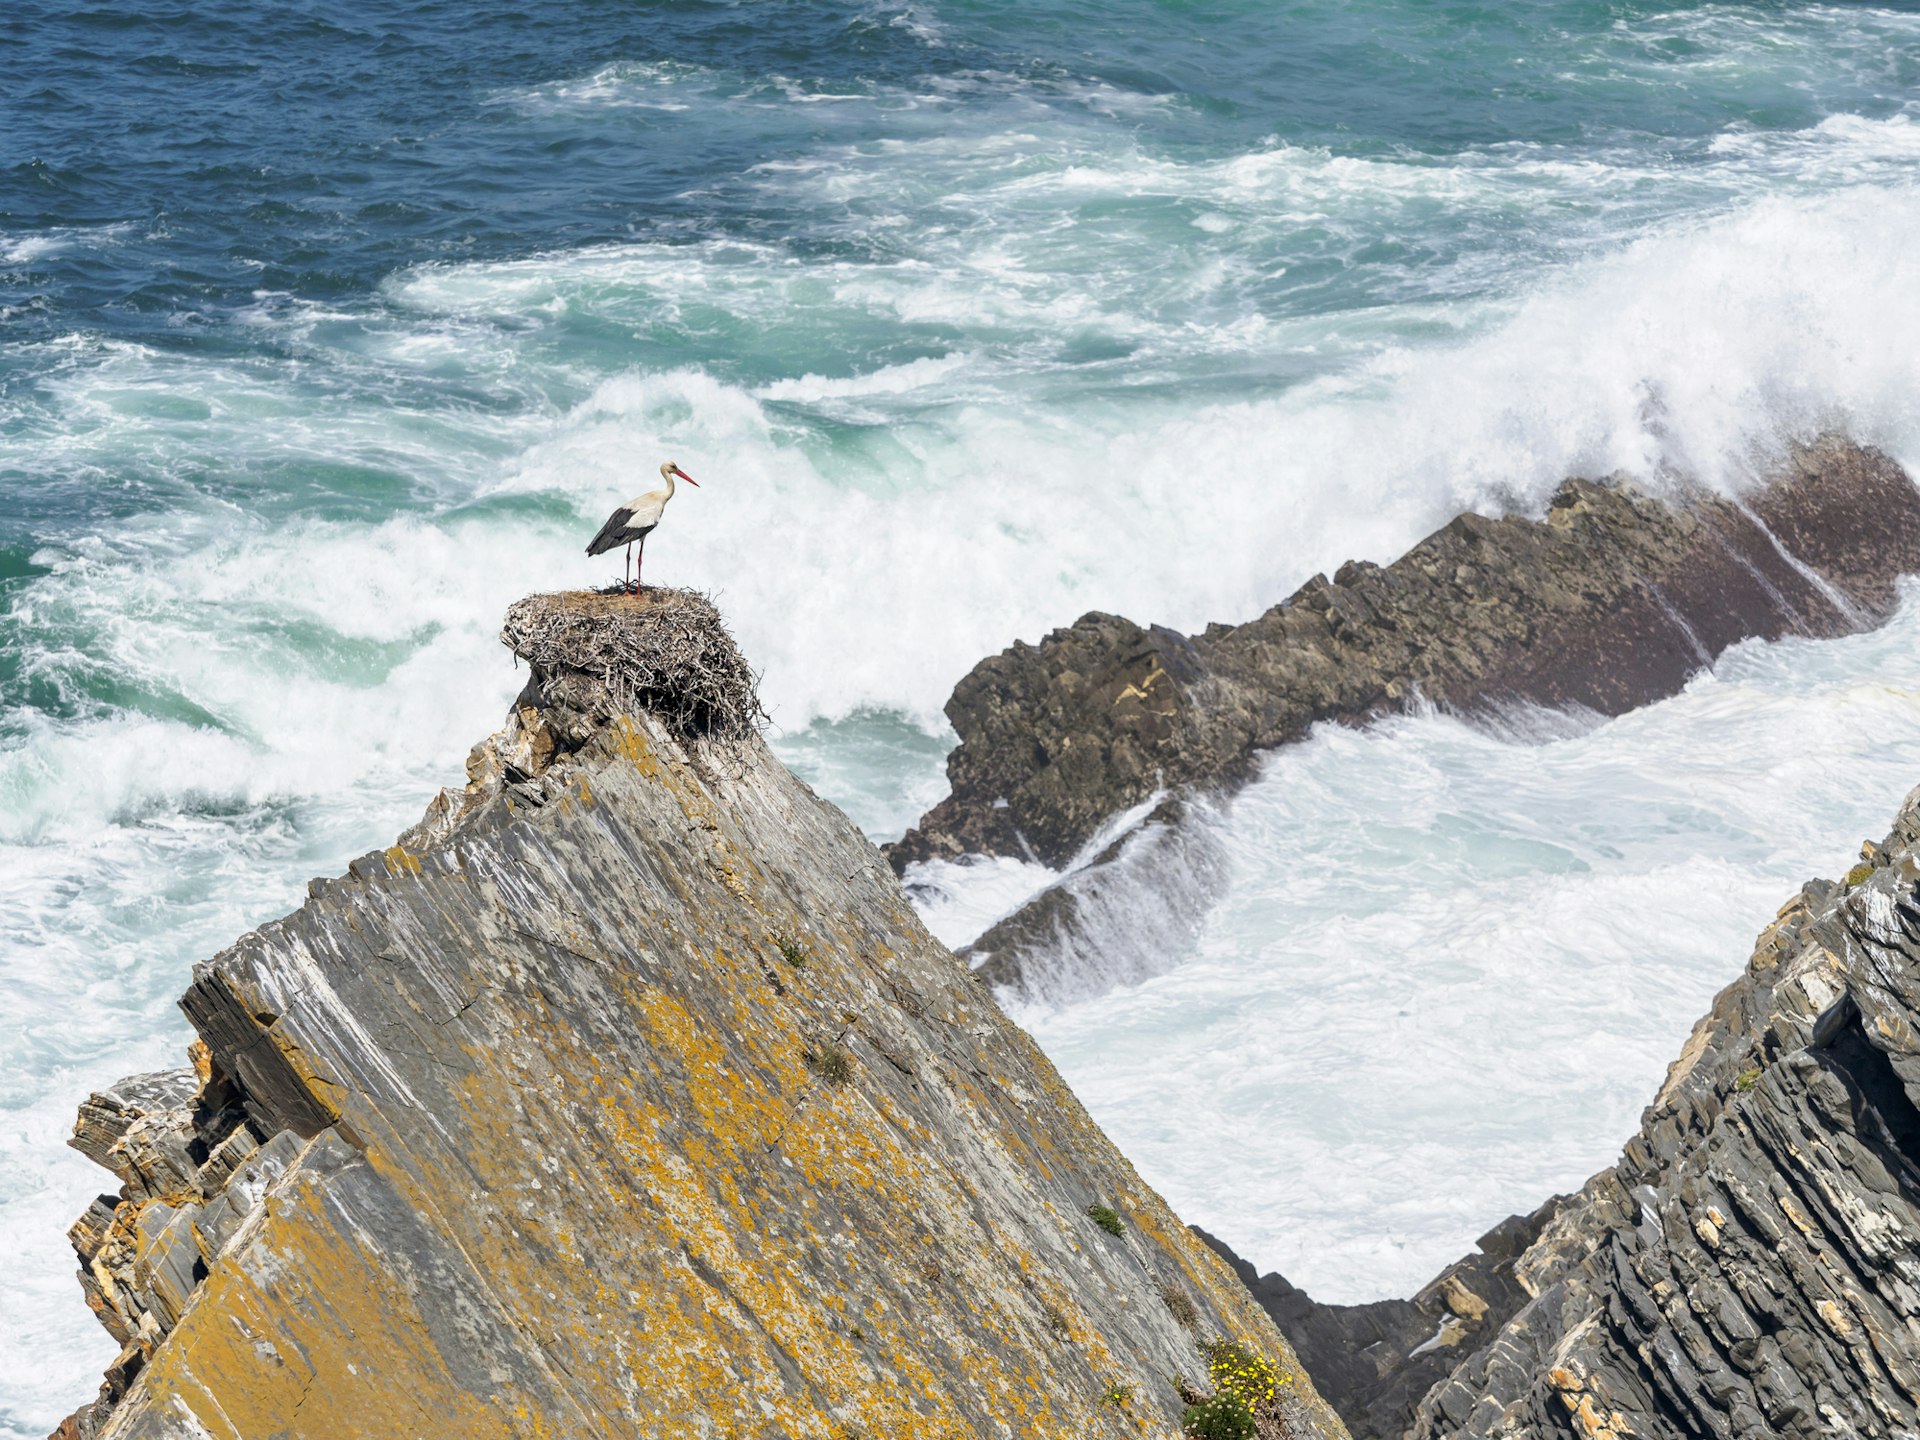 A stork nesting on a huge rock by the sae at Parque Natural do Sudoeste Alentejano e Costa Vicentina